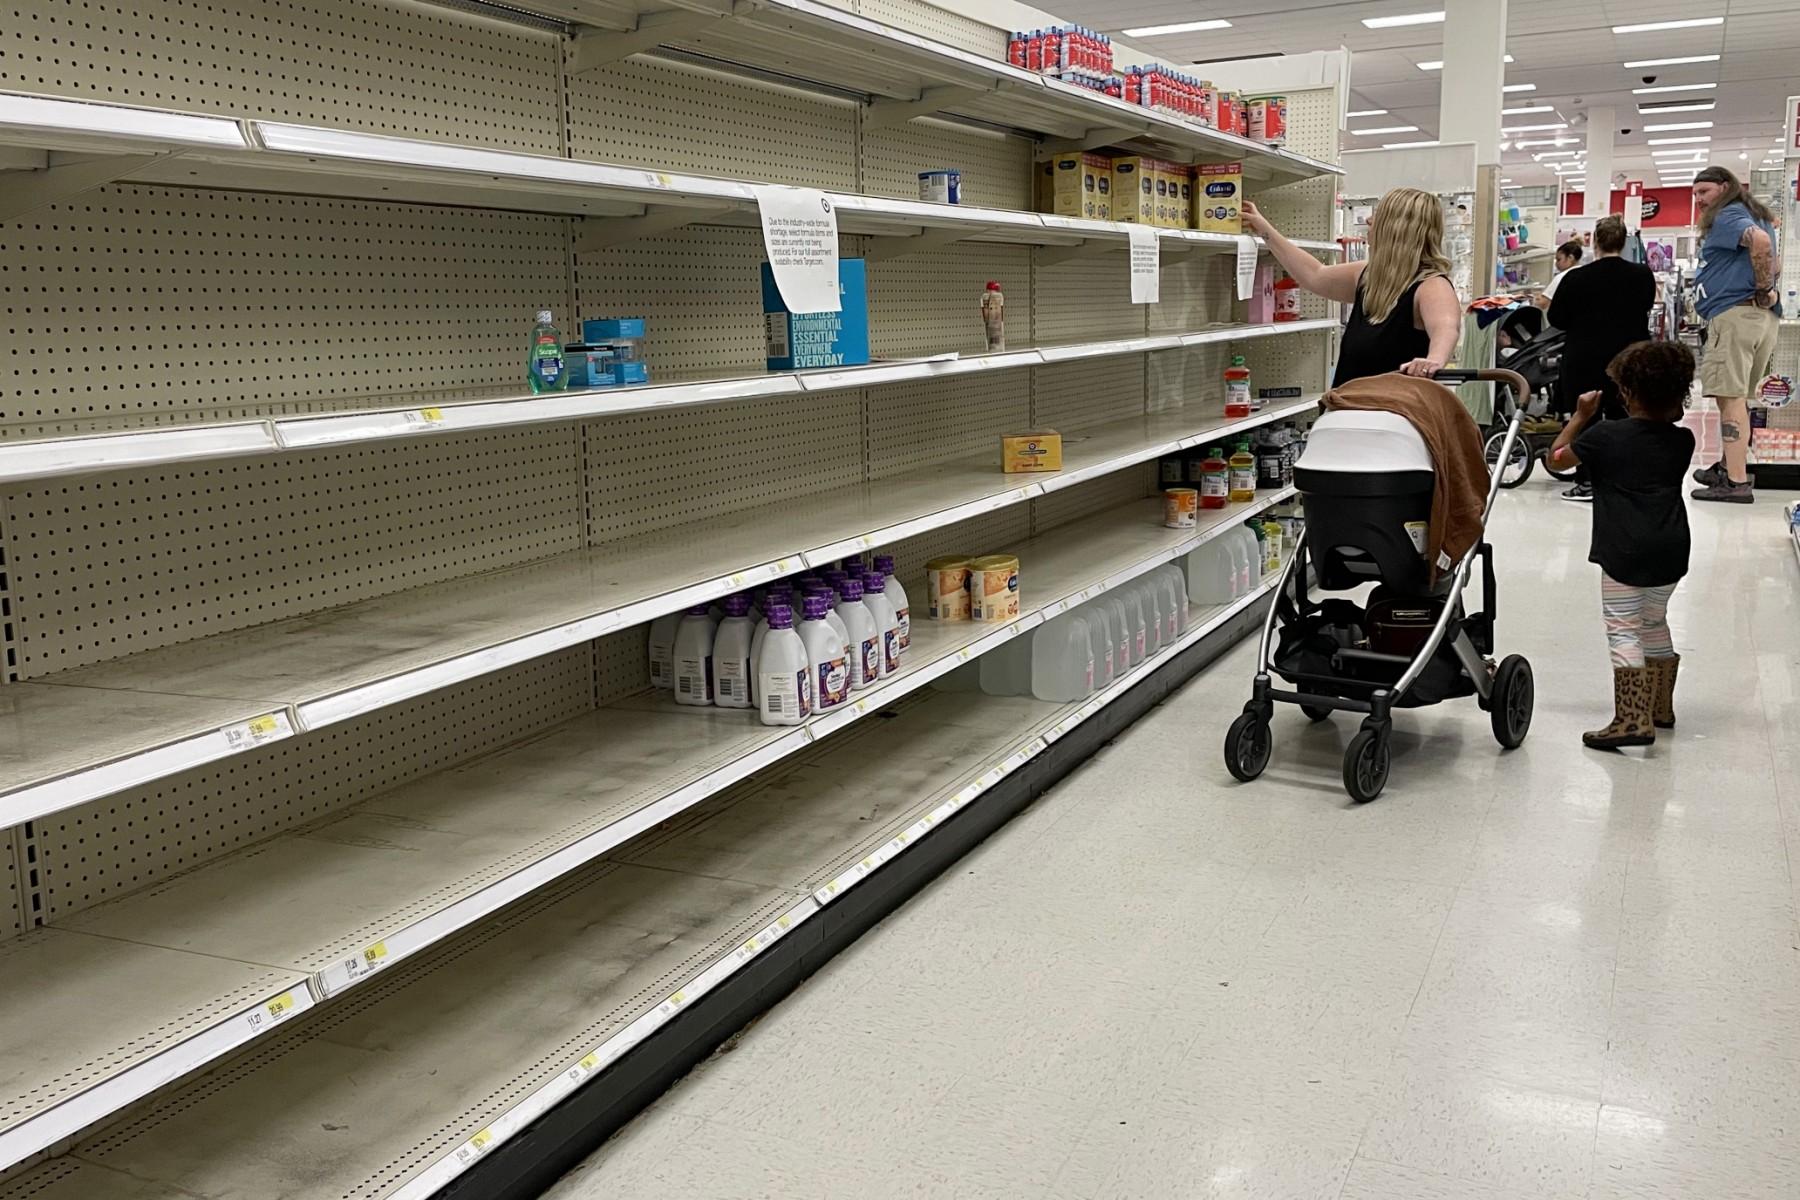 A woman shops for baby formula at Target in Annapolis, Maryland, on May 16, as a nationwide shortage of baby formula continues due to supply chain crunches tied to the coronavirus pandemic that have already strained the country’s formula stock. Photo: AFP